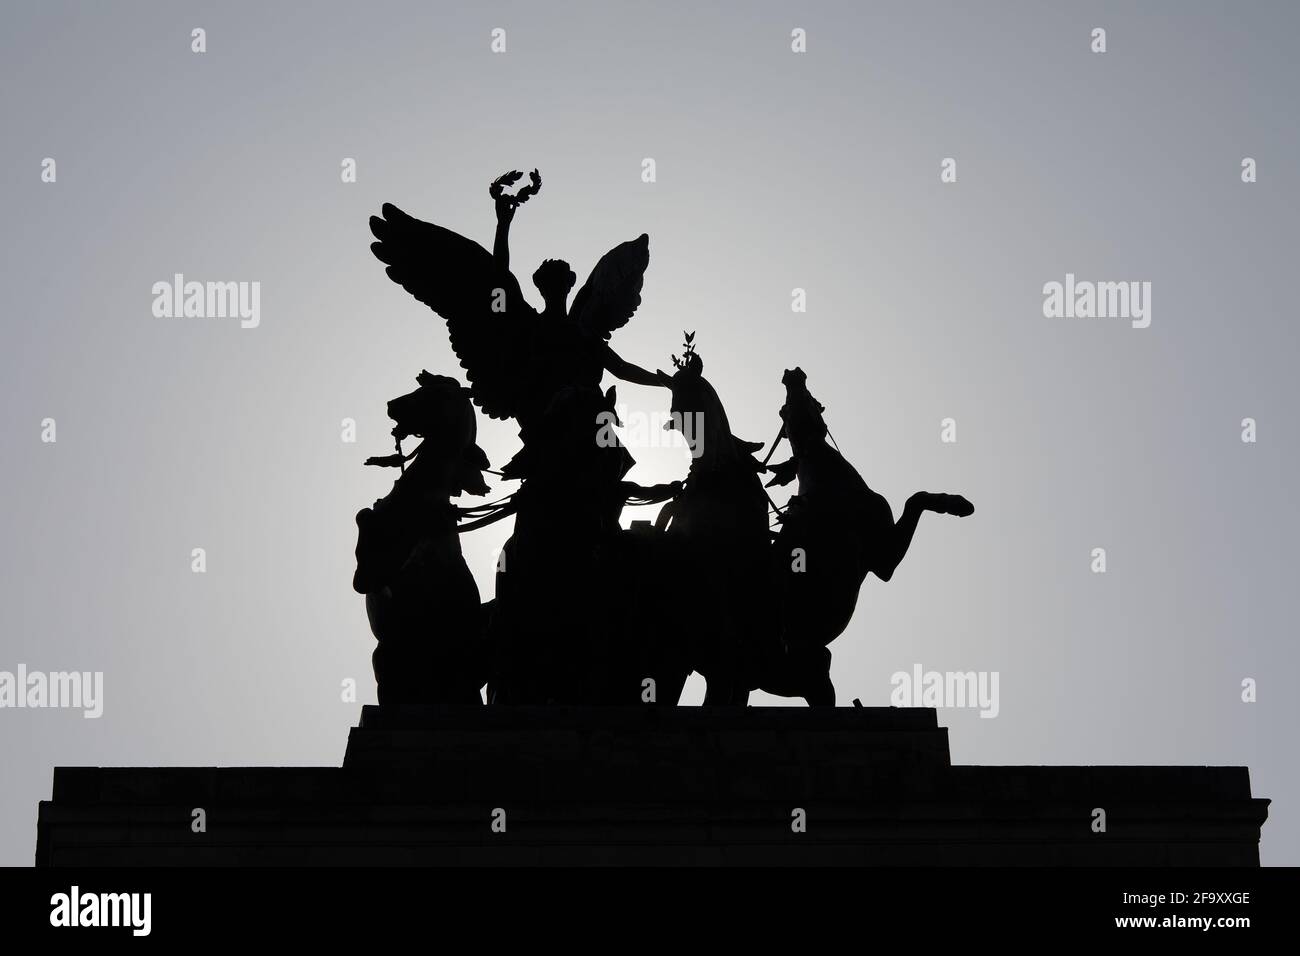 London, UK - 20 Apr 2021: The bronze quadriga thats sits atop of Wellington Arch in Hyde Park Corner, silhouetted against the morning sun. Stock Photo